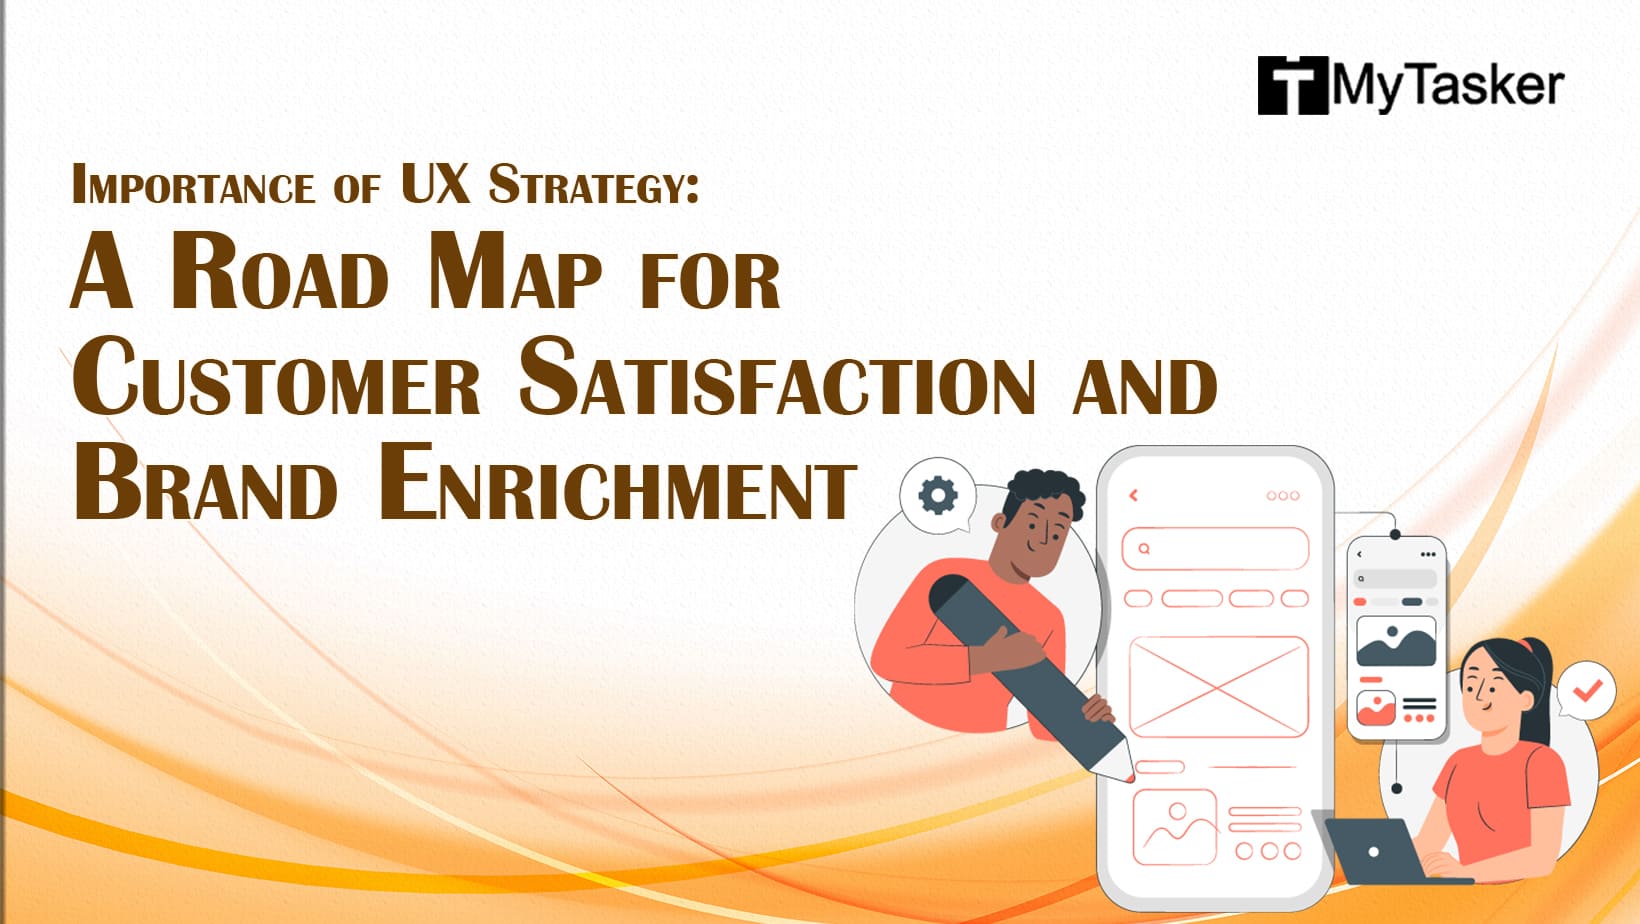 Importance of UX Strategy: A Road Map for Customer Satisfaction and Brand Enrichment